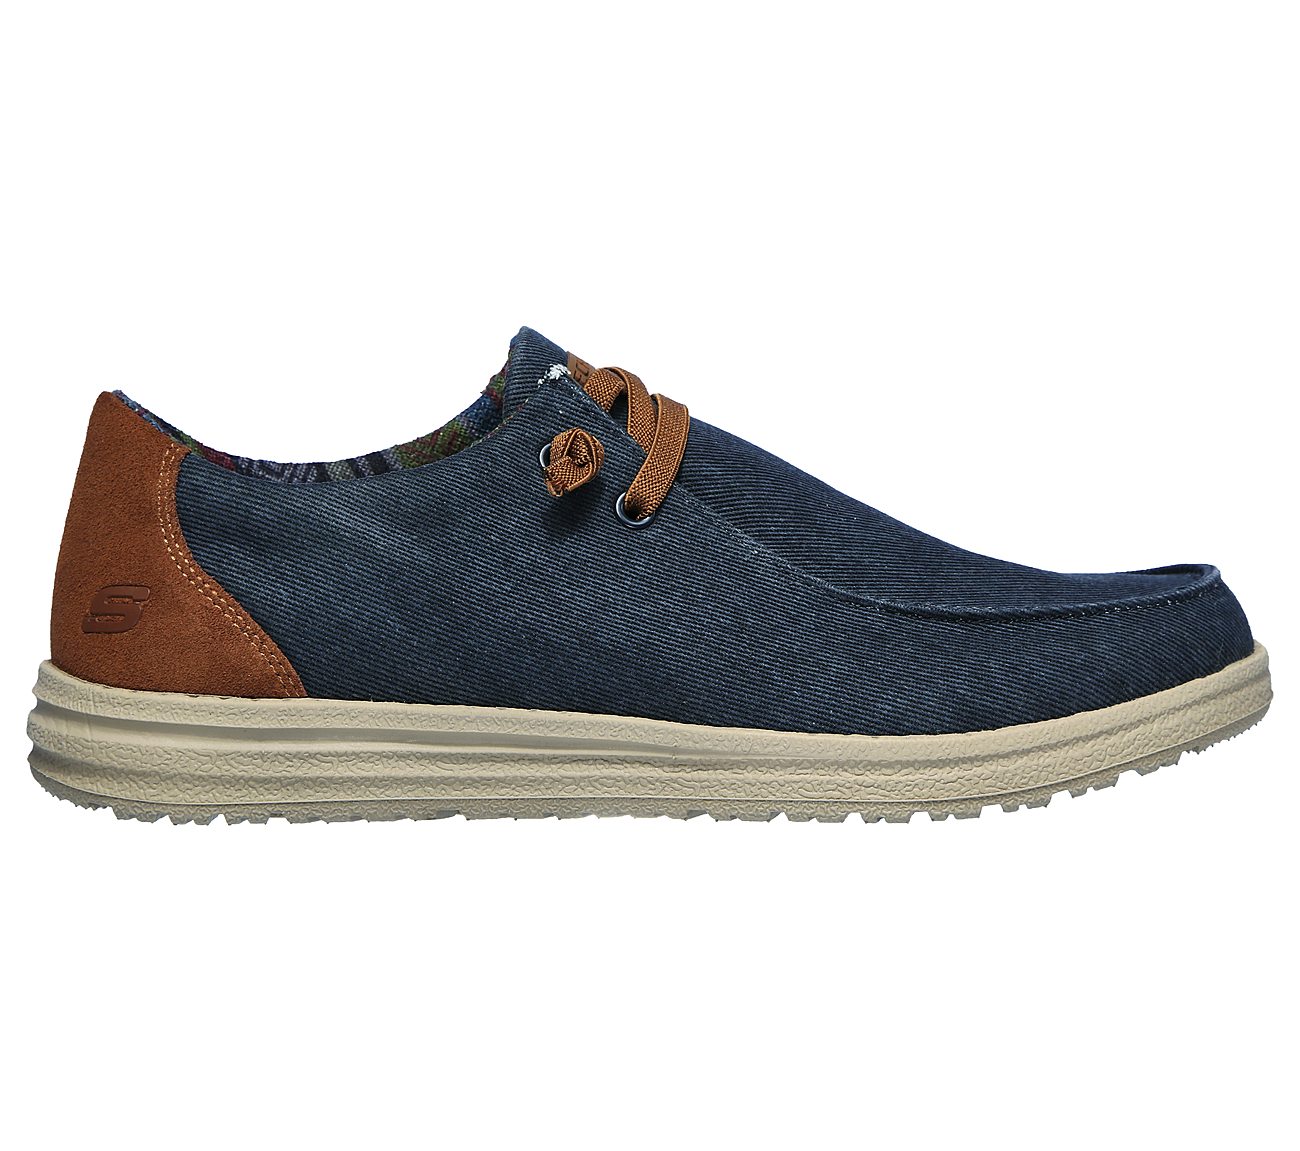 Buy SKECHERS Relaxed Fit: Melson - Parlen USA Casuals Shoes